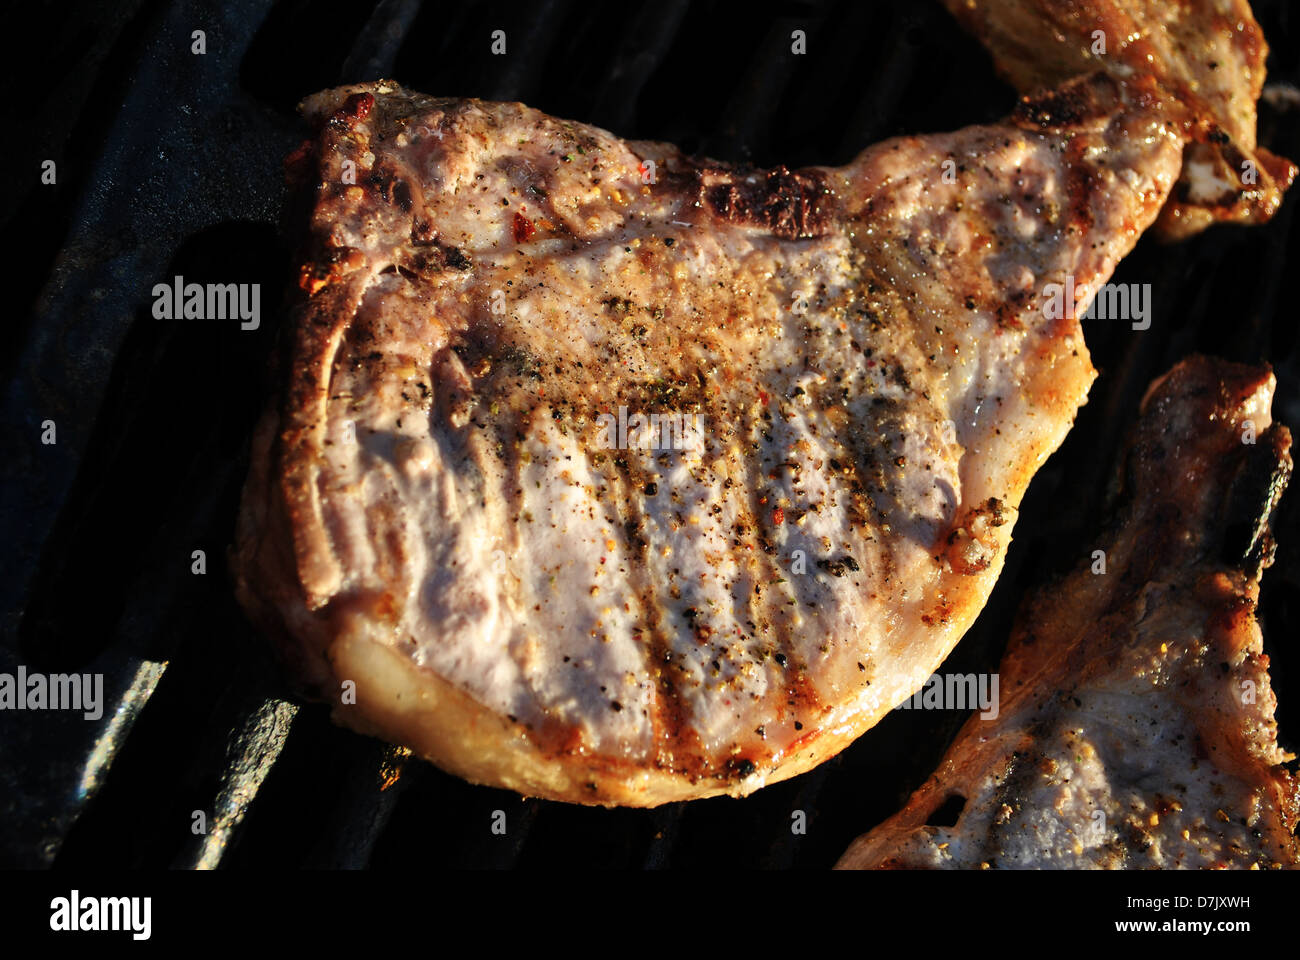 Cooked Thick Pork Chop on the Grill Stock Photo